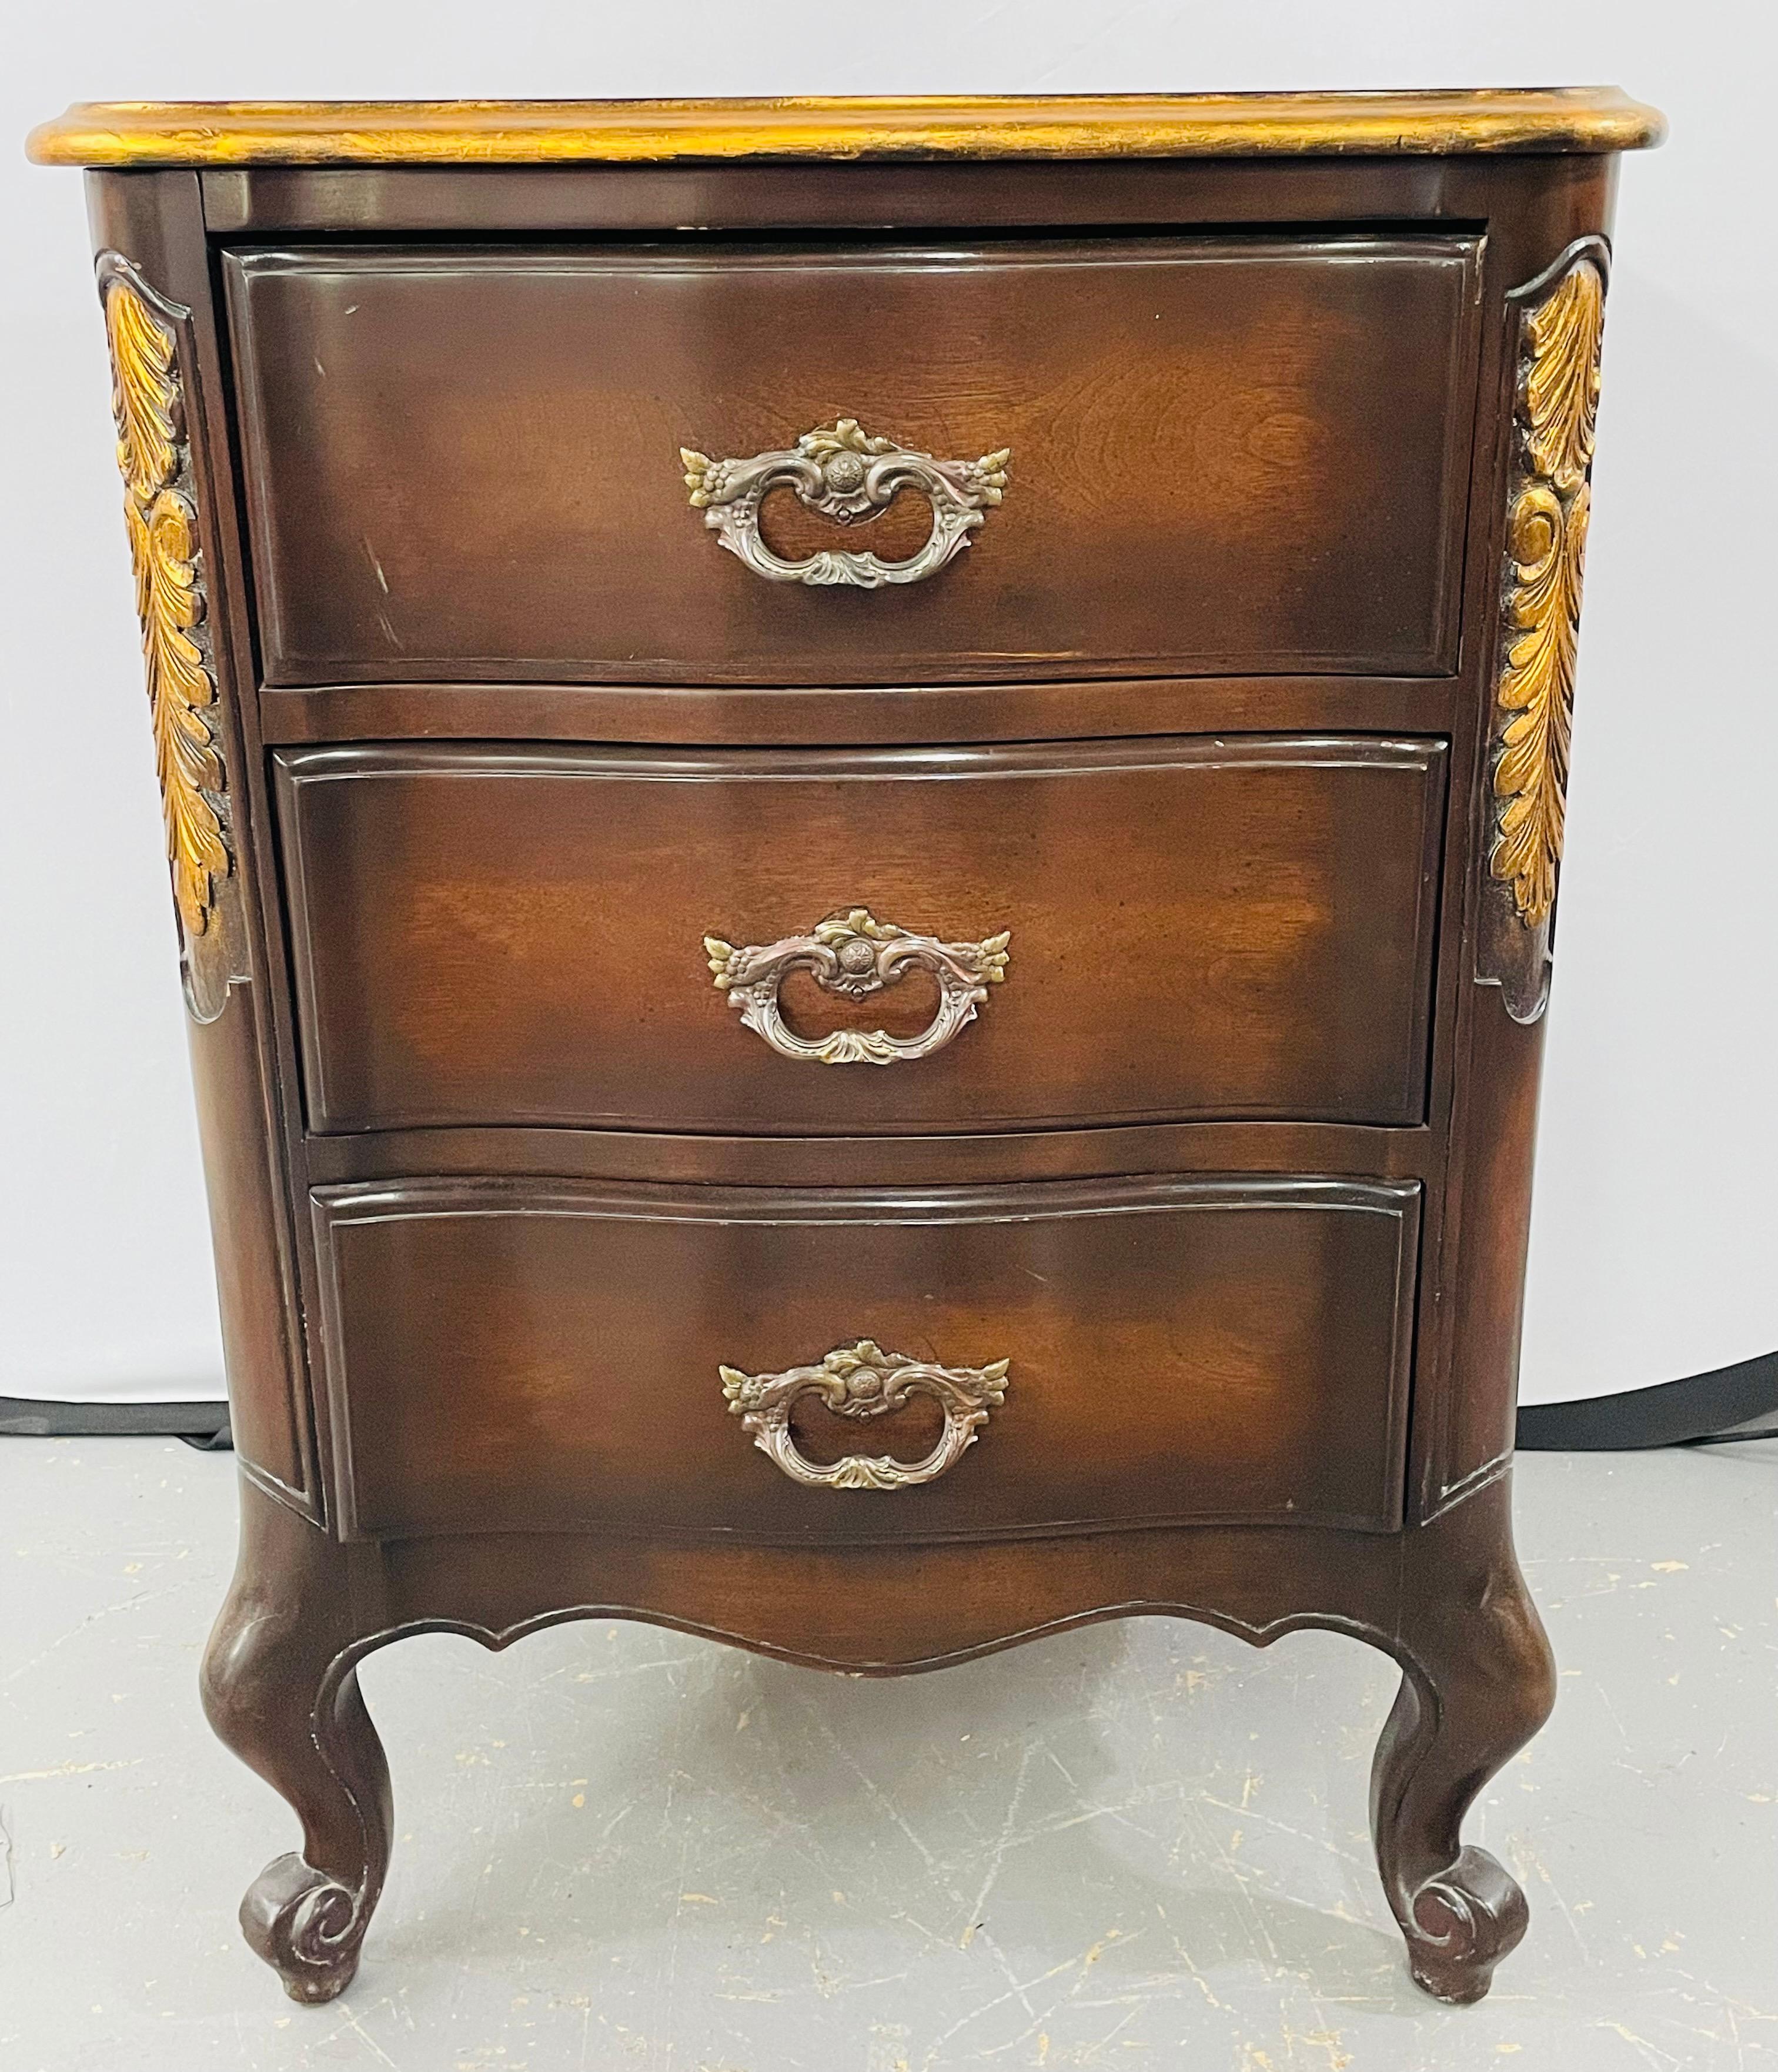 French Provincial 3 Drawer Mahogany Gilt Decorated Nightstand Table, a Pair 4